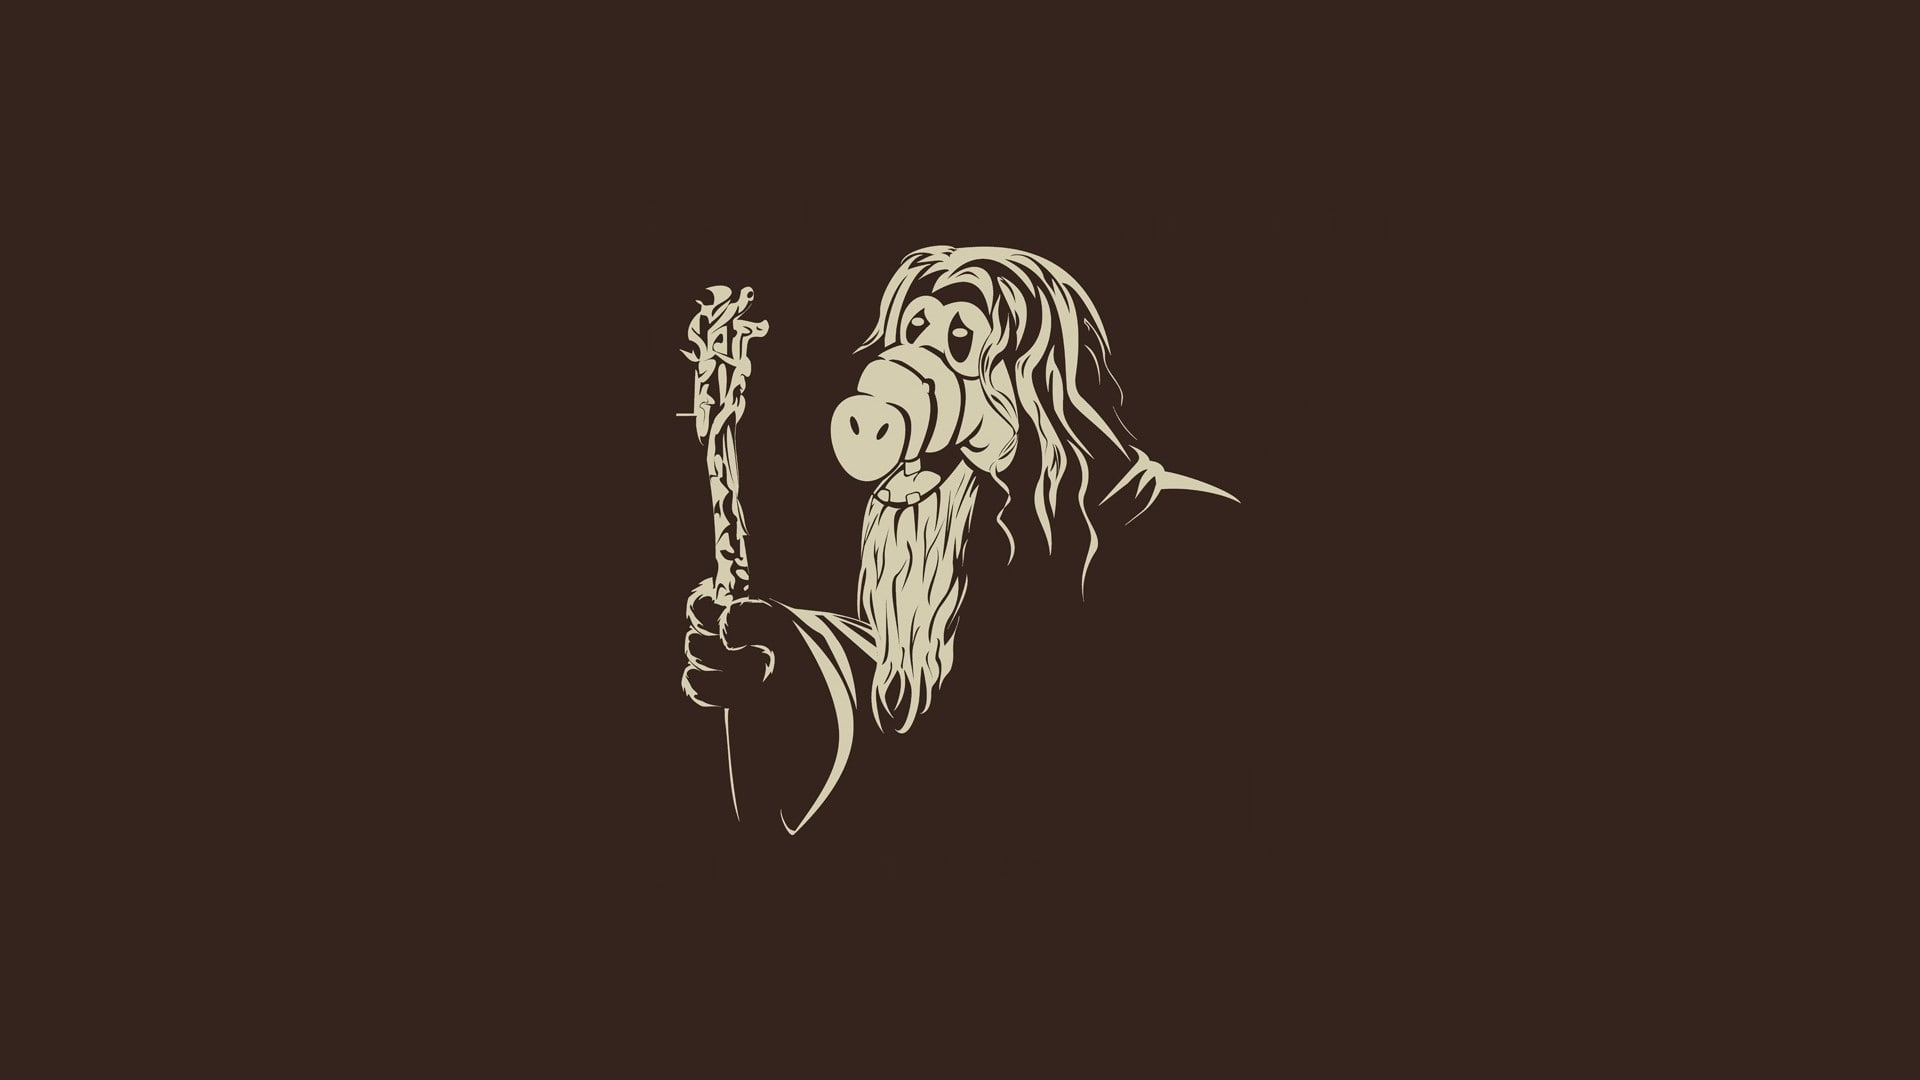 abstract, alf, crossovers, gandalf, lord, rings, Simple, simplistic